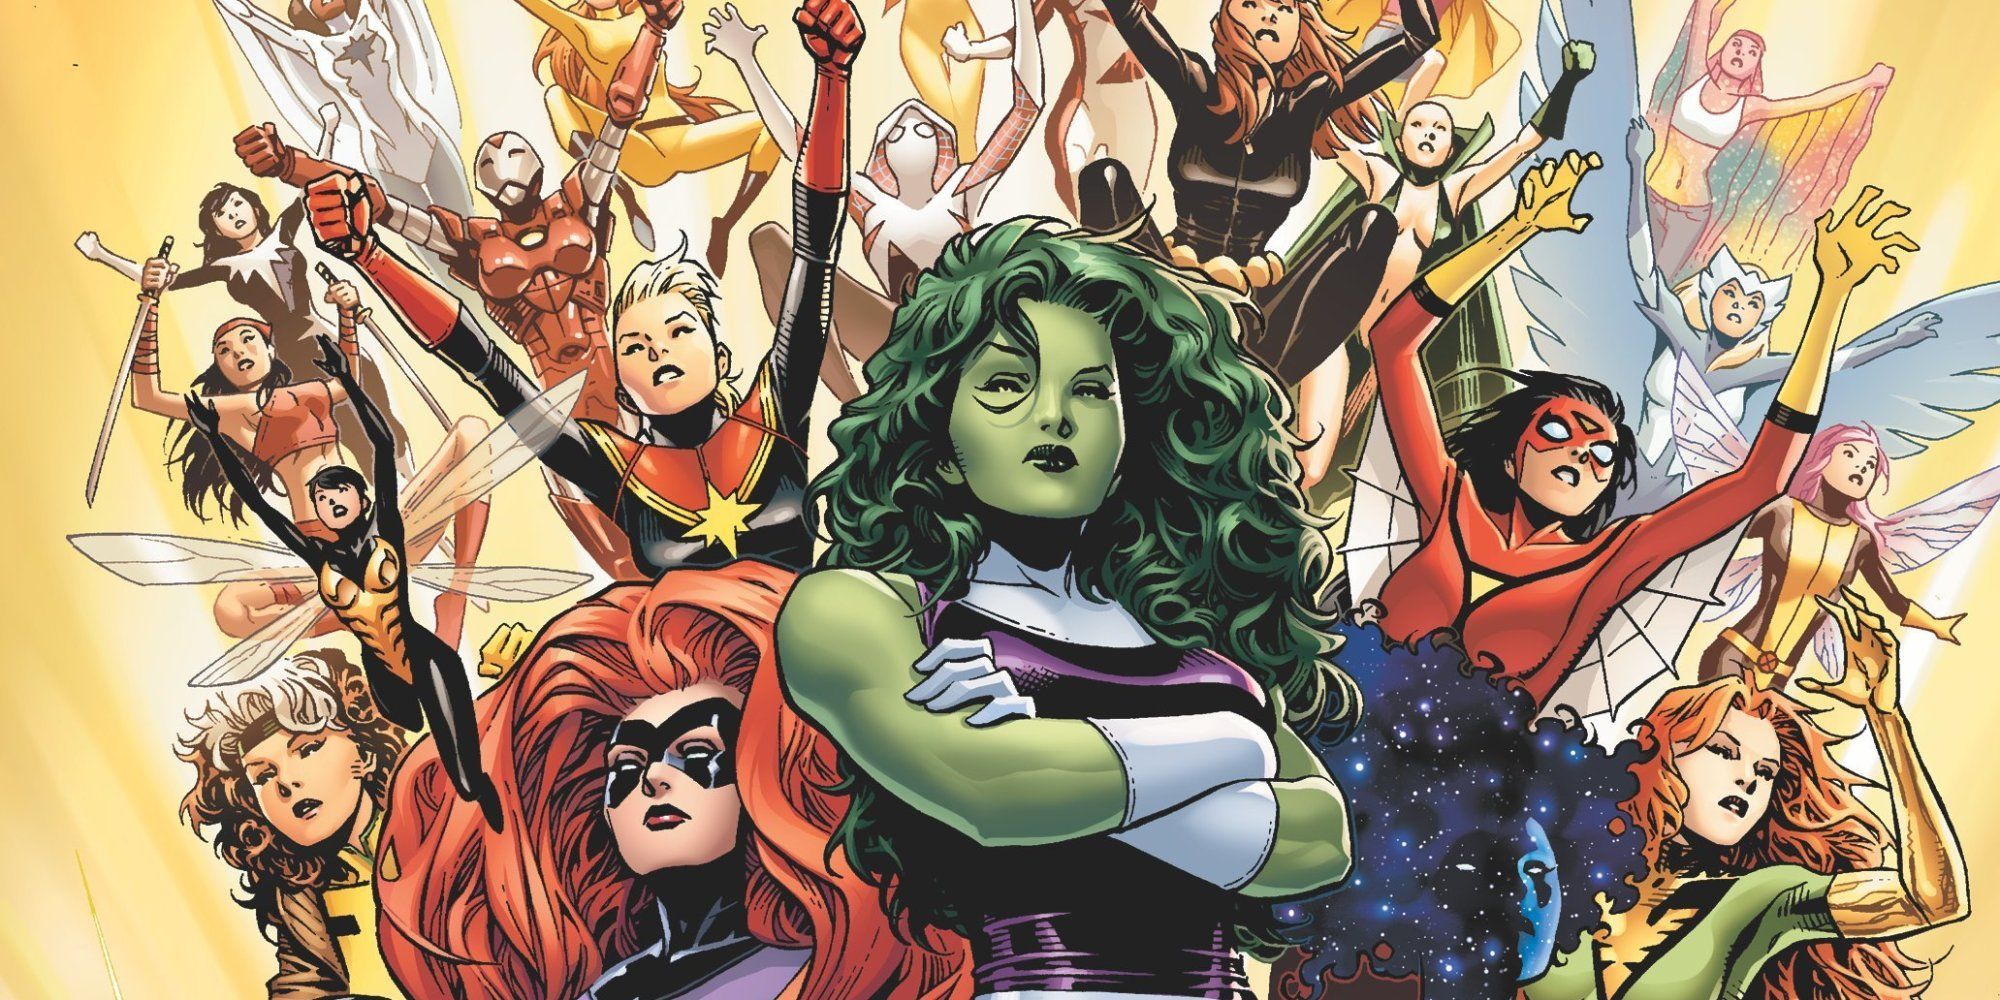 She-Hulk and the A-Force in Marvel Comics